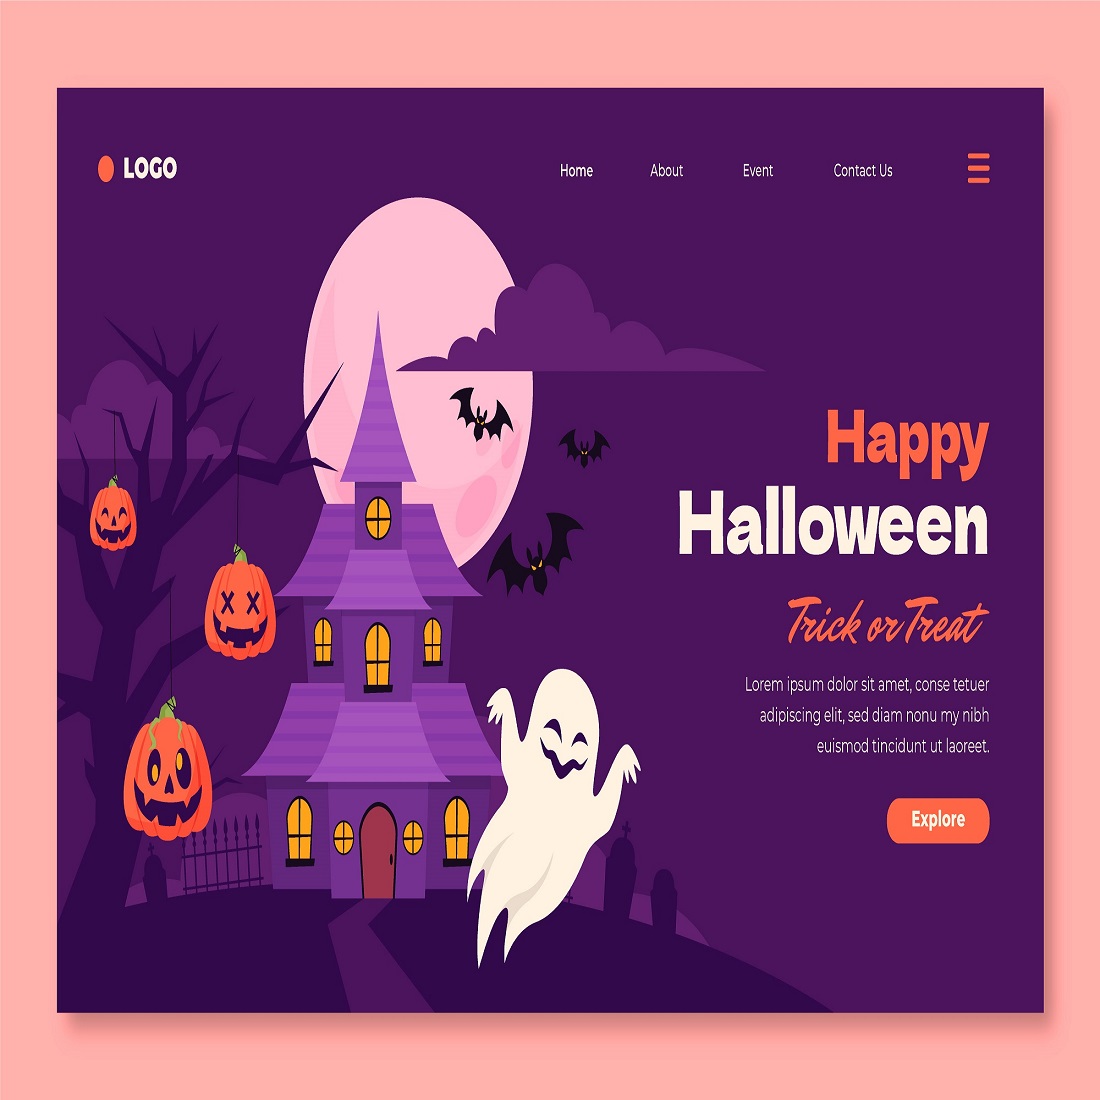 Happy Halloween celebration landing page template preview image.